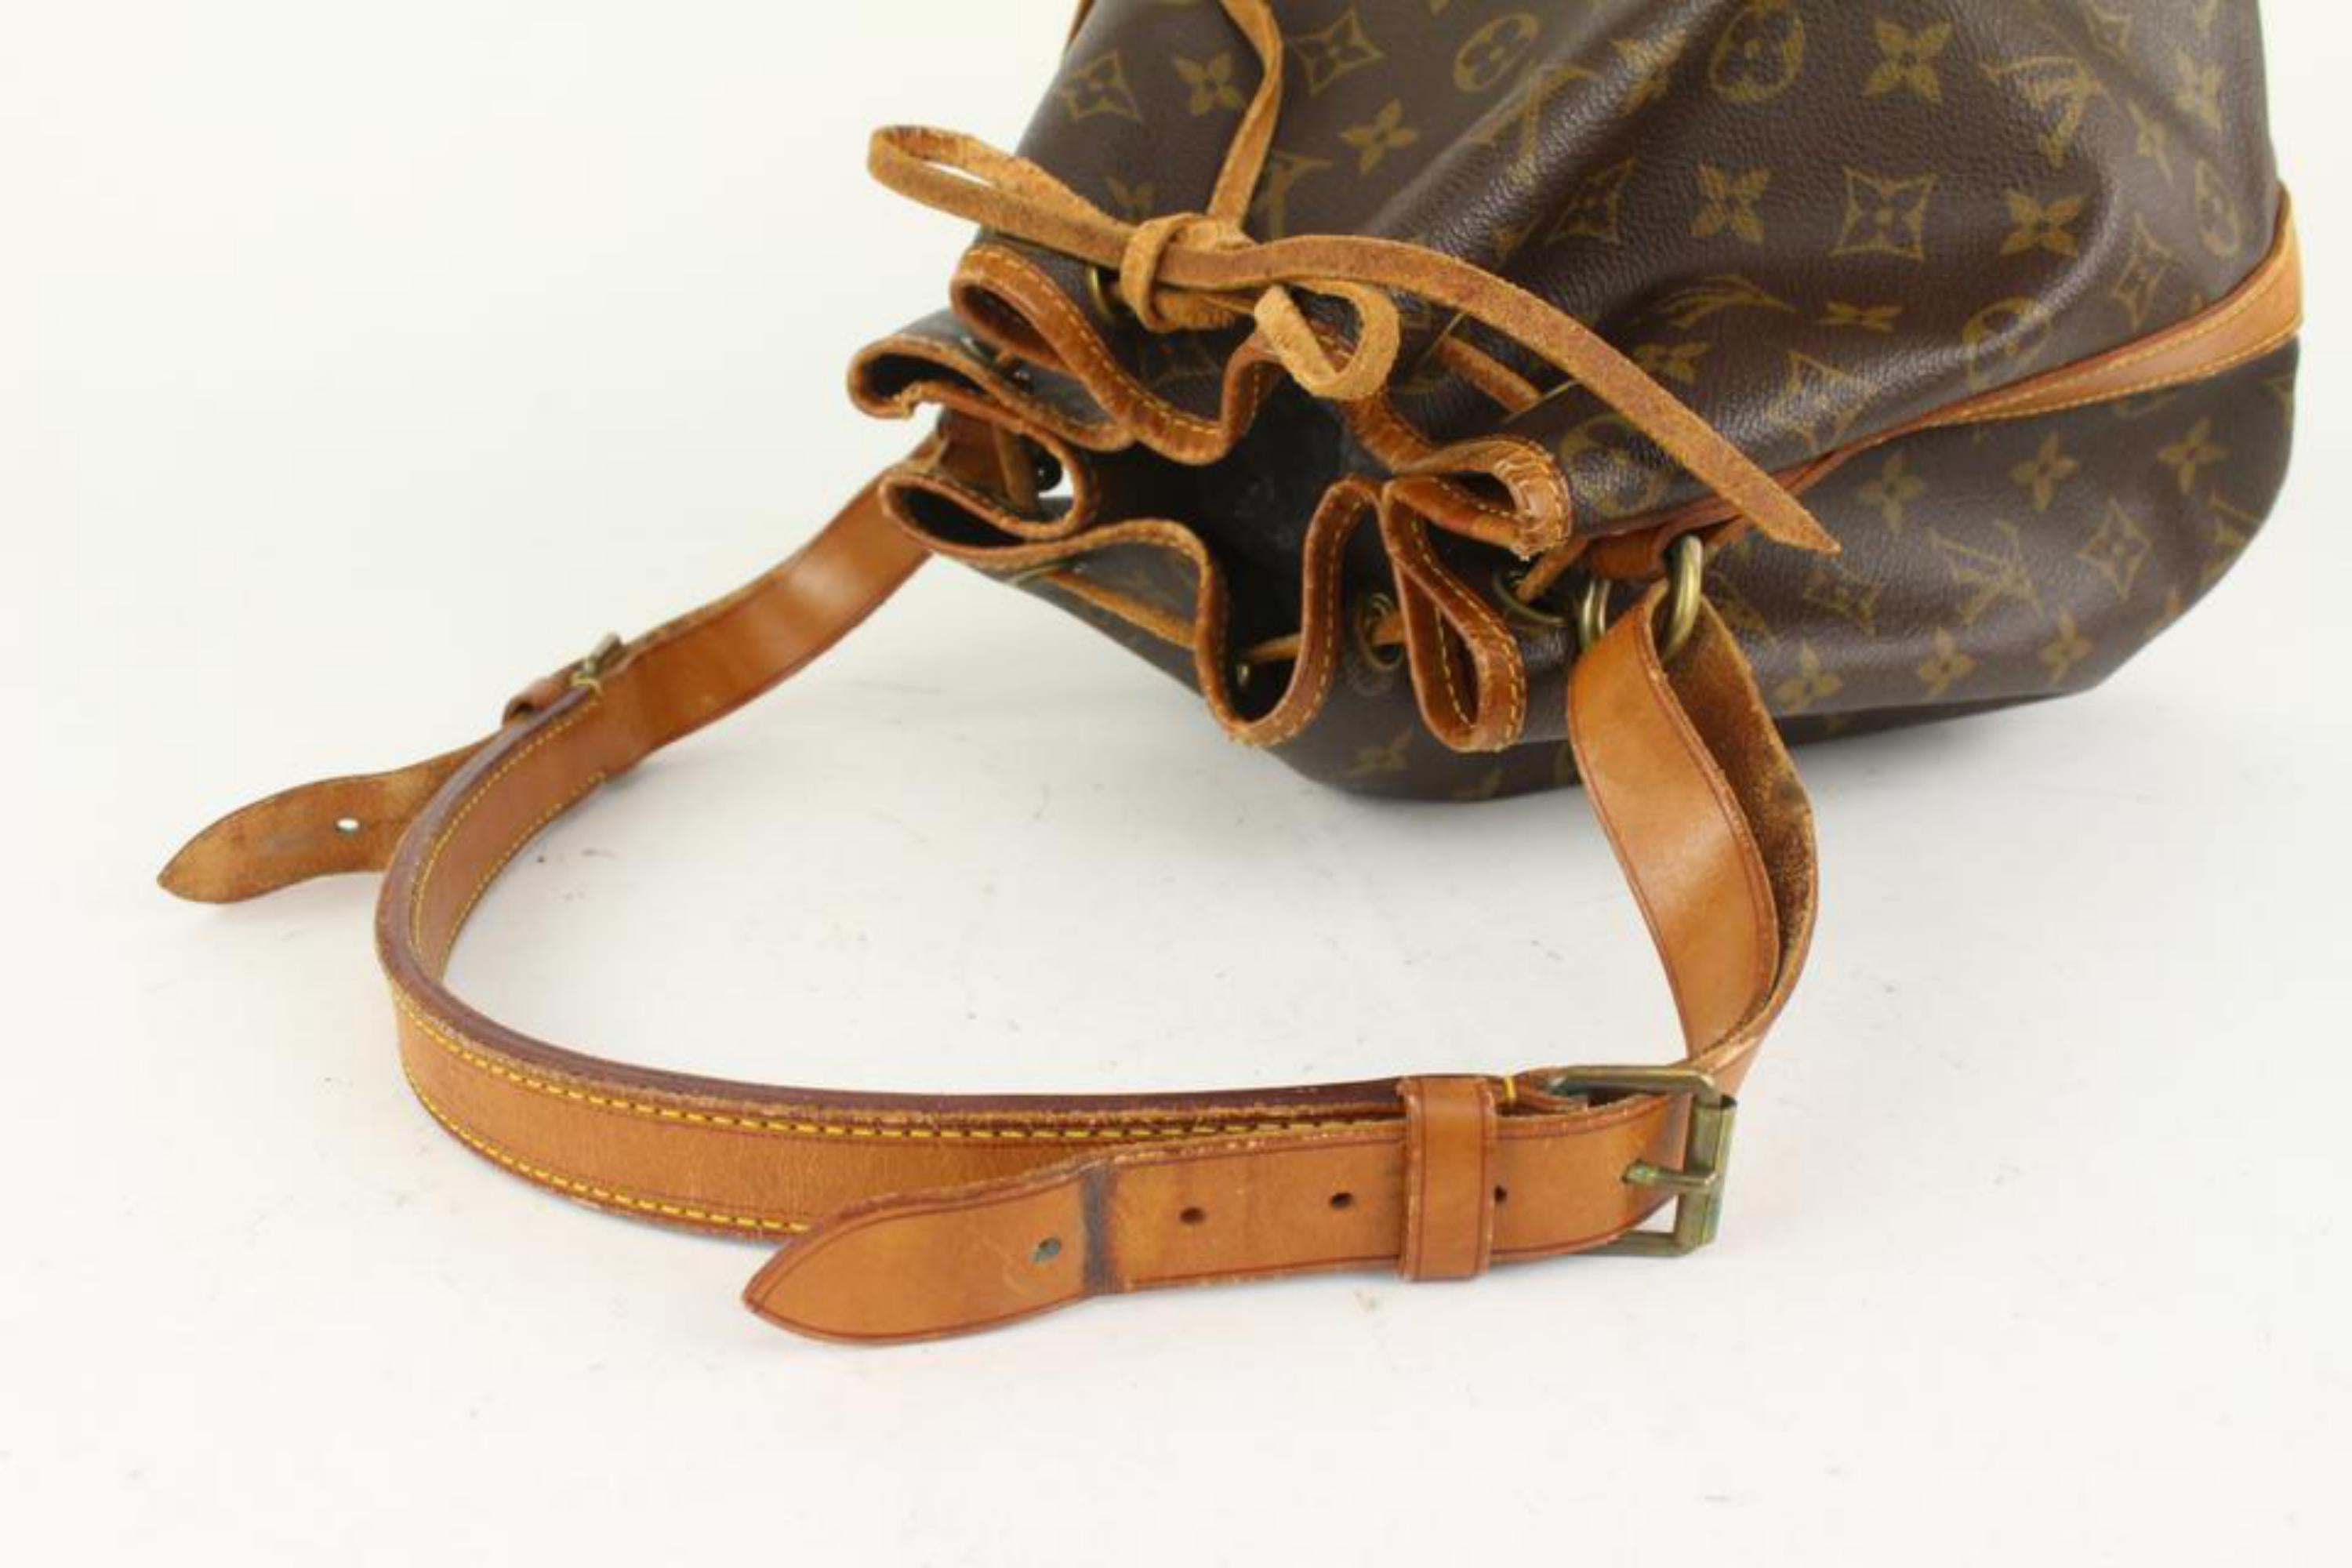 Louis Vuitton Monogram Petit Noe Drawstring Bucket Hobo Bag 1019lv24 In Fair Condition For Sale In Dix hills, NY